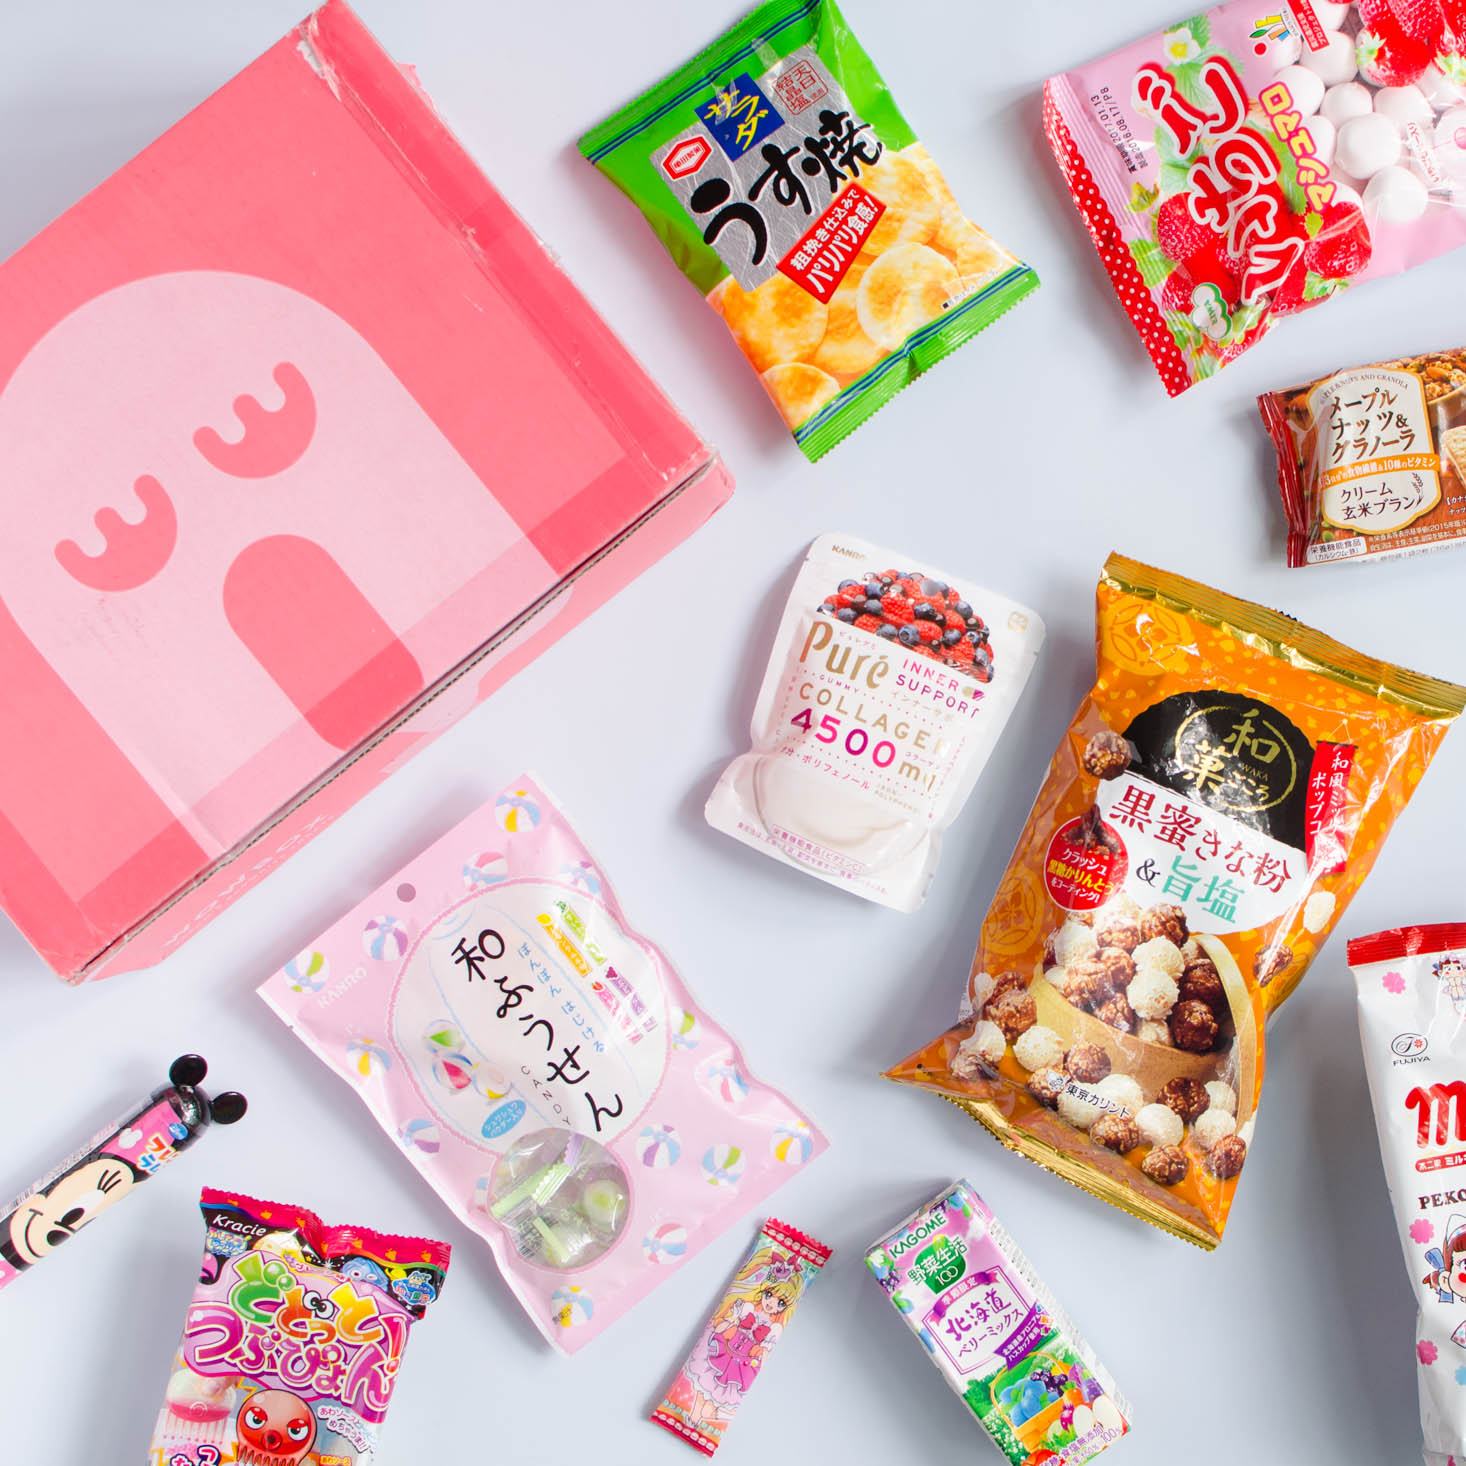 WOWBOX Black Friday Sale – 25% Off Japanese Snack Subscriptions!